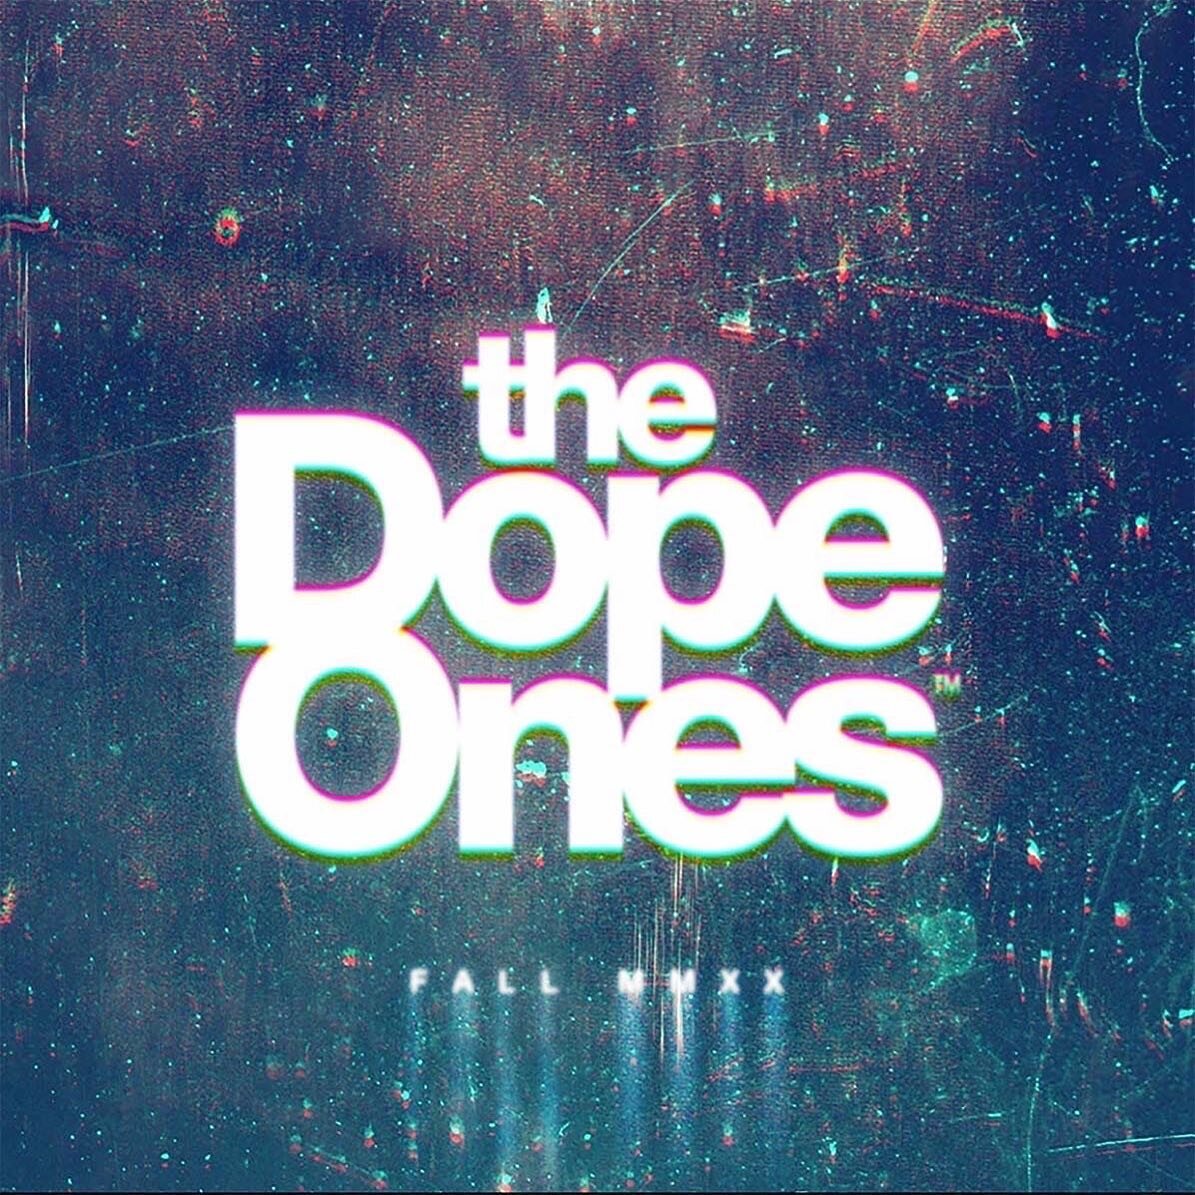 The Fall MMXX COLLECTION Drops 10.1.20. Stay tuned.
_____
Only at www.thedopeones.com
_____
Follow @dopeonesofficial @donisdope